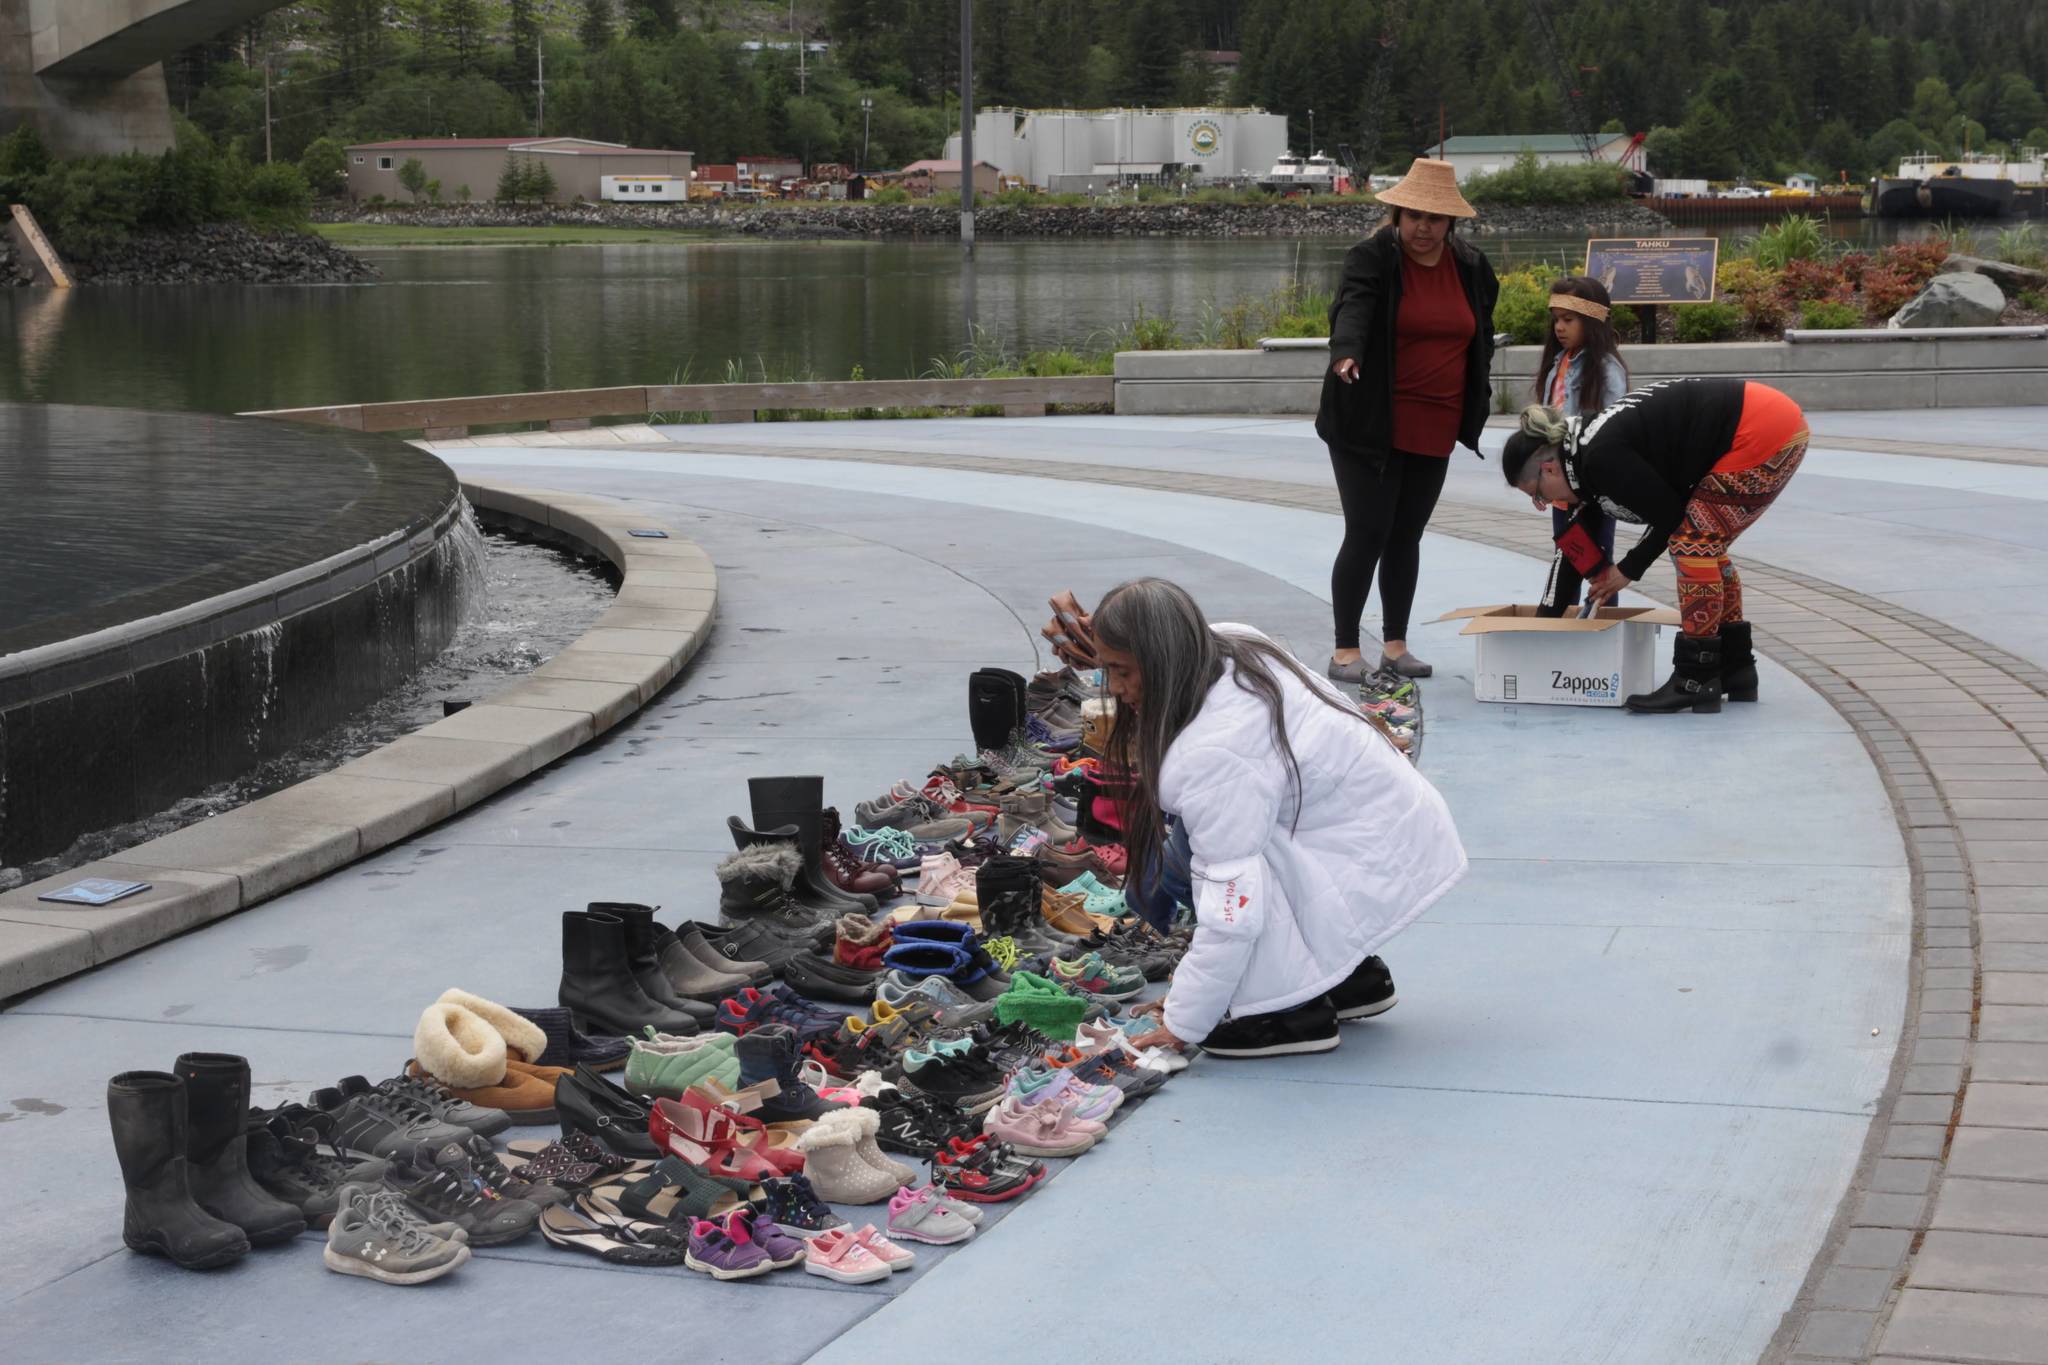 Juneau residents place hundreds of pairs of children’s shoes in front of the state at Mayor Bill Overstreet Park on June 12, 2021 as they mourned for the 215 dead children uncovered at a residential school in Canada in Juneau, Alaska. (Michael S. Lockett/Juneau Empire)